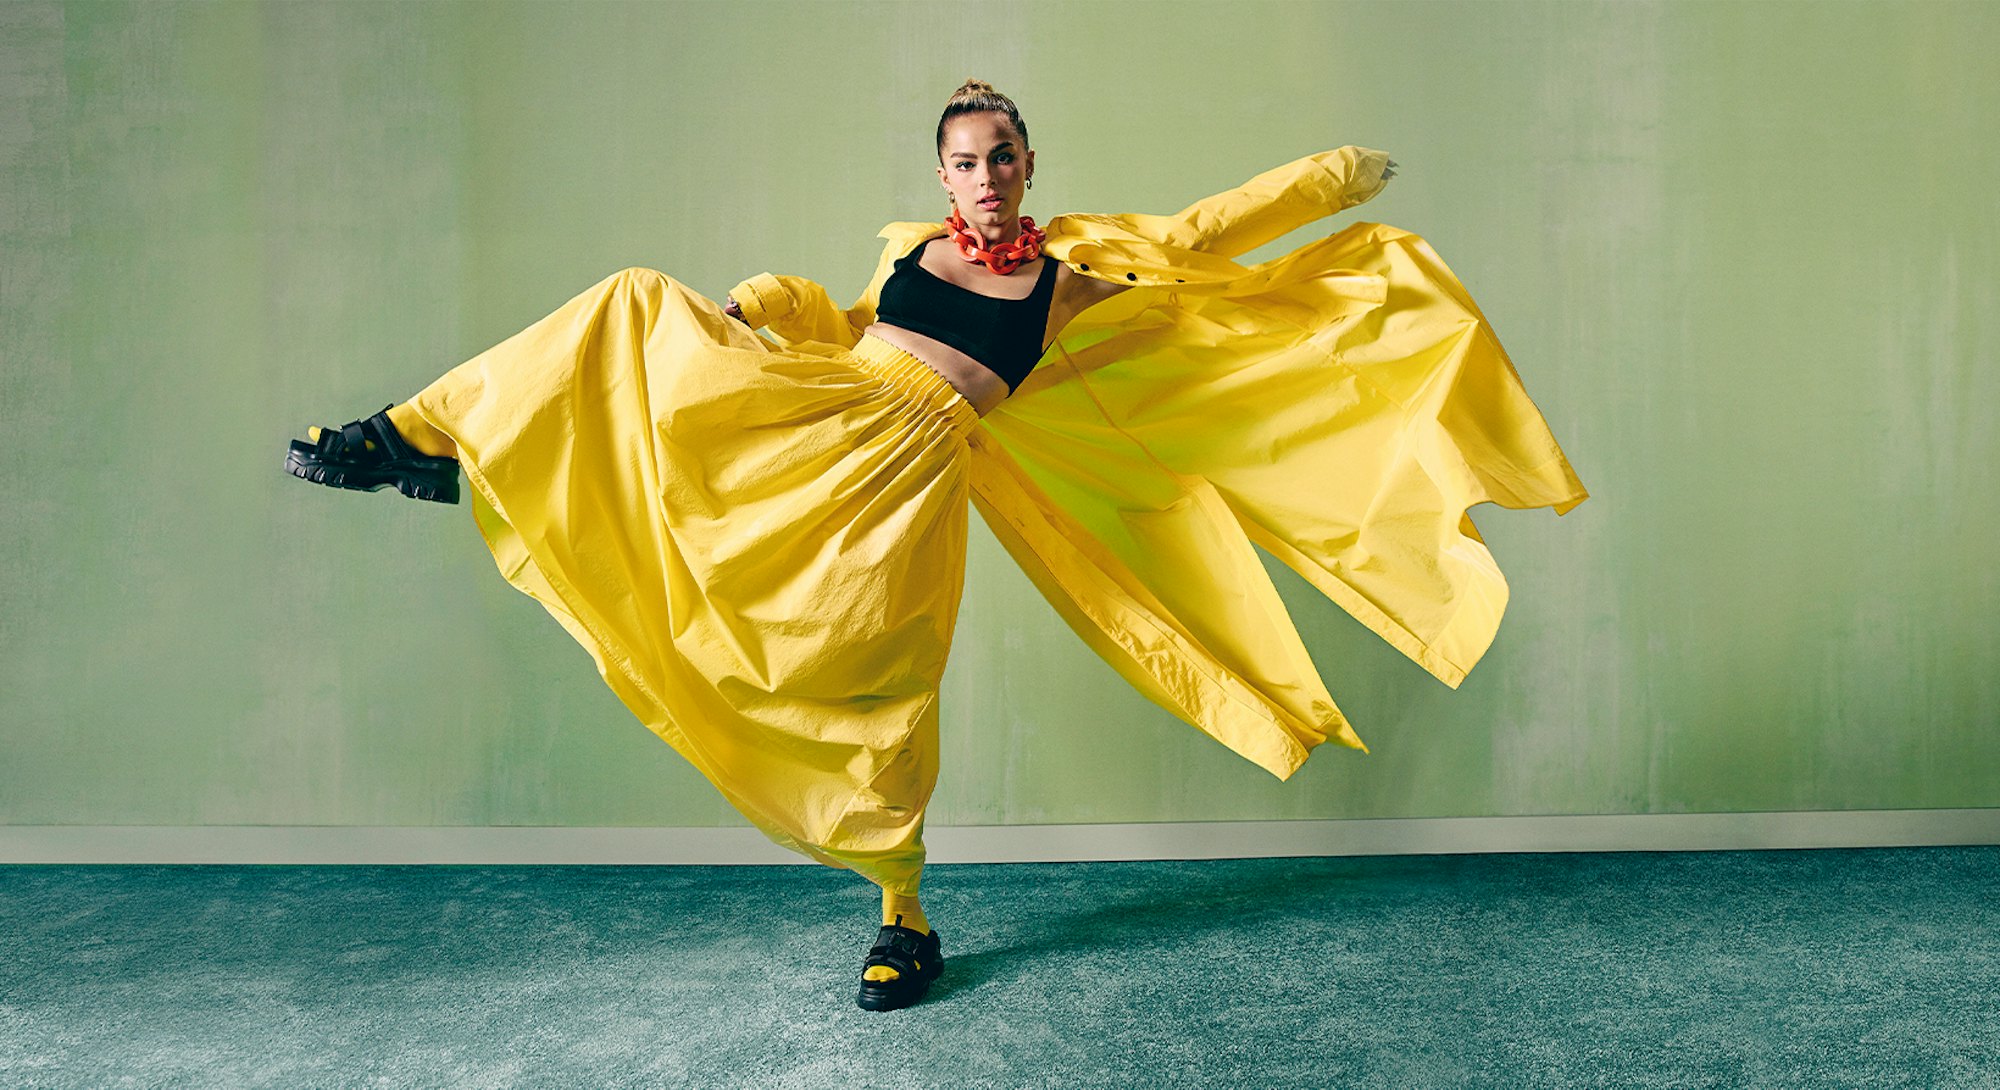 TikTok star Addison Rae wears a yellow outfit as she appears on Bustle's cover.